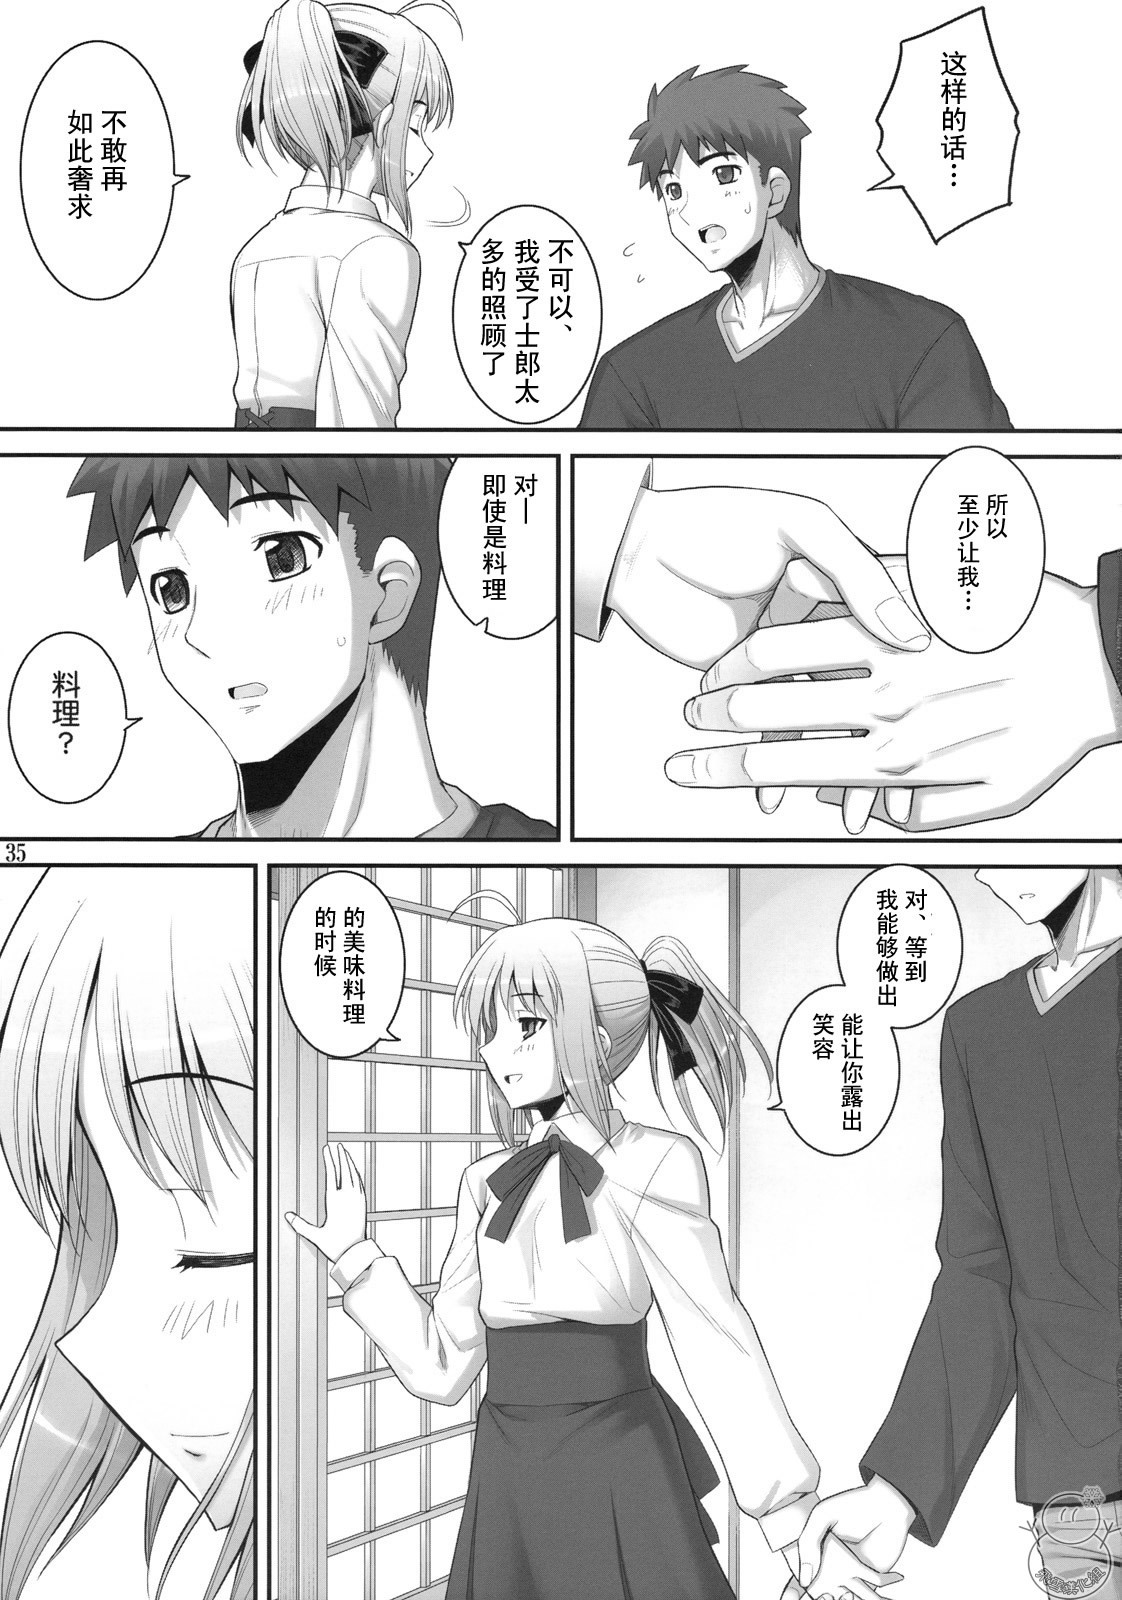 (C75) [RUBBISH Selecting Squad (Namonashi)] RE 10 (Fate/stay night) [Chinese] [飞雪汉化组] page 34 full